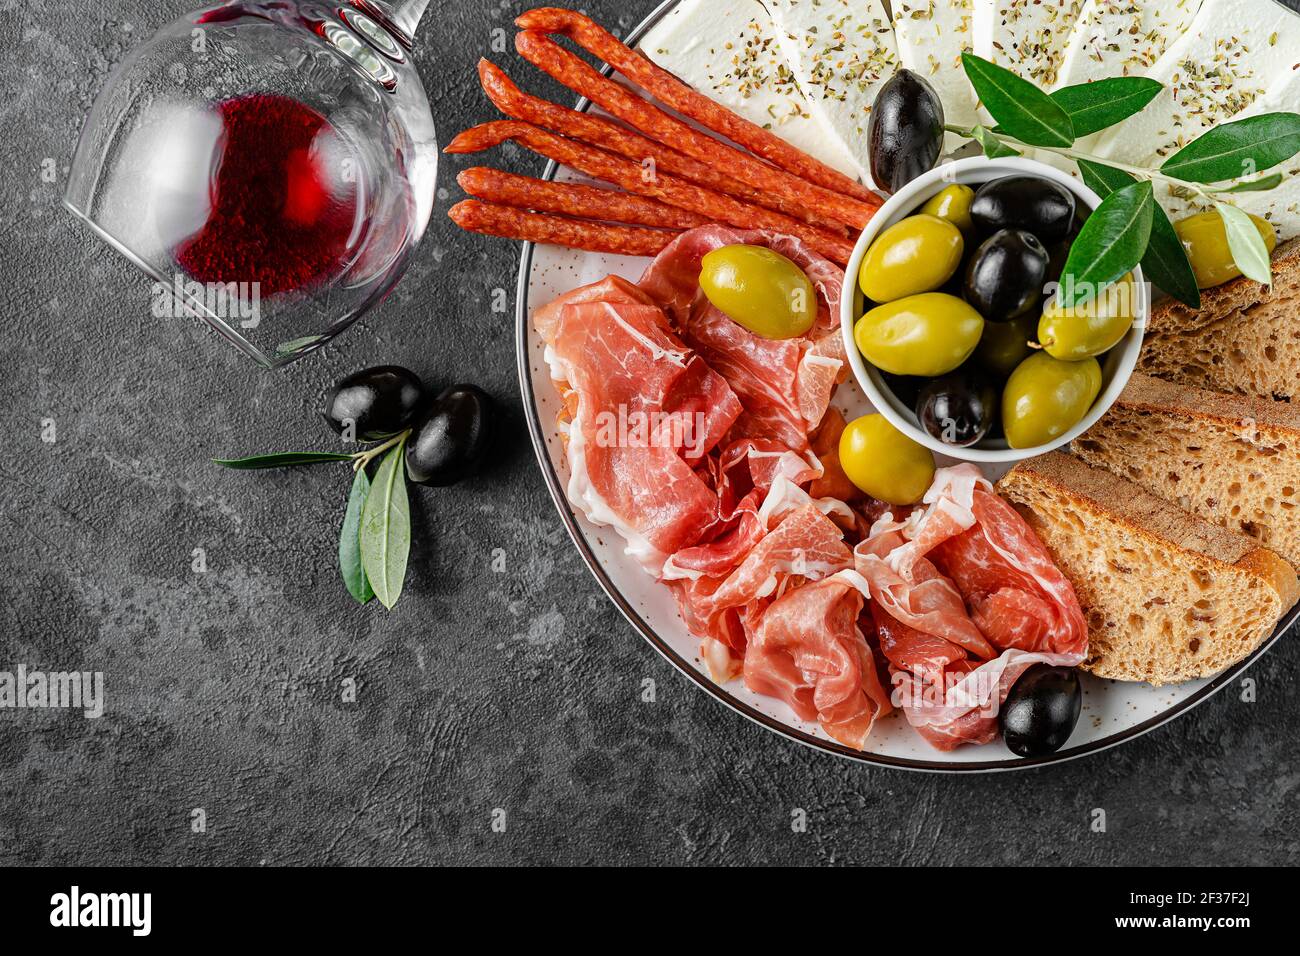 Italian antipasto plate with red wine on dark background. Top view, copy space. Stock Photo